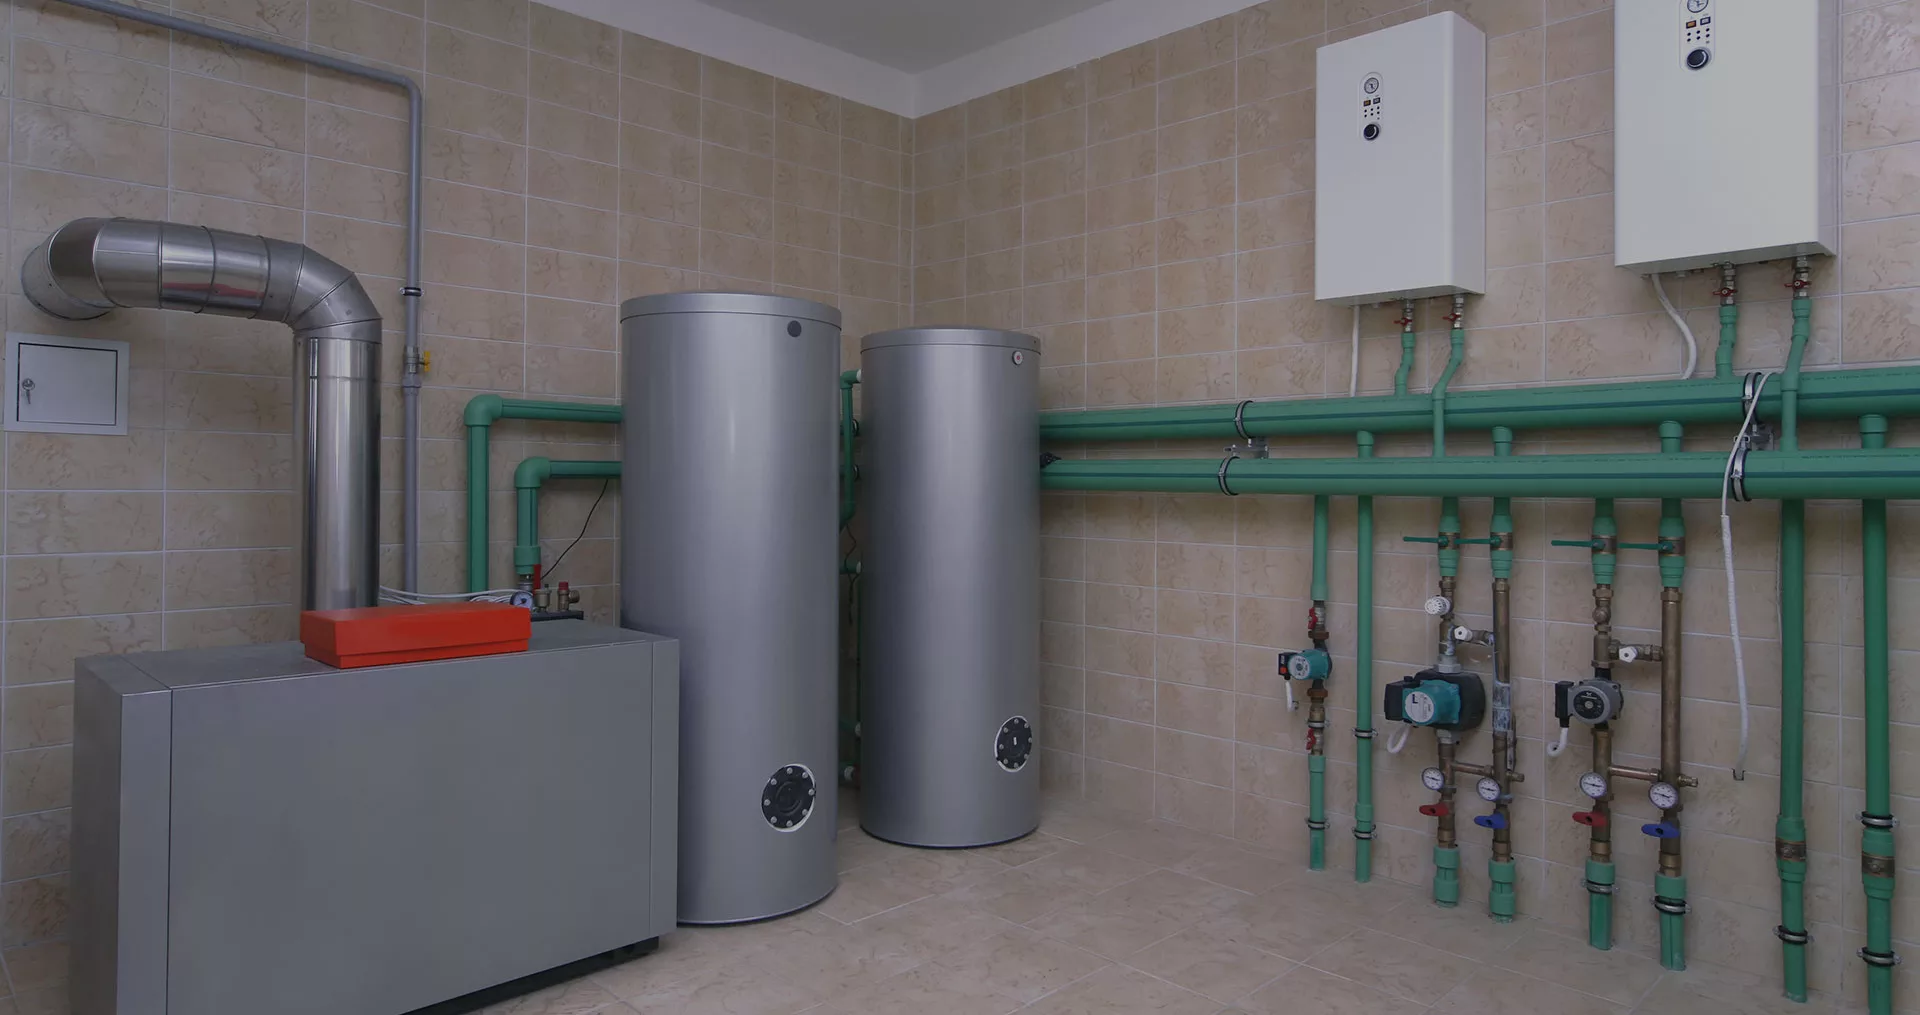 Emergency Boiler Replacement, Repair Plumbing Services Avalaible 24/7